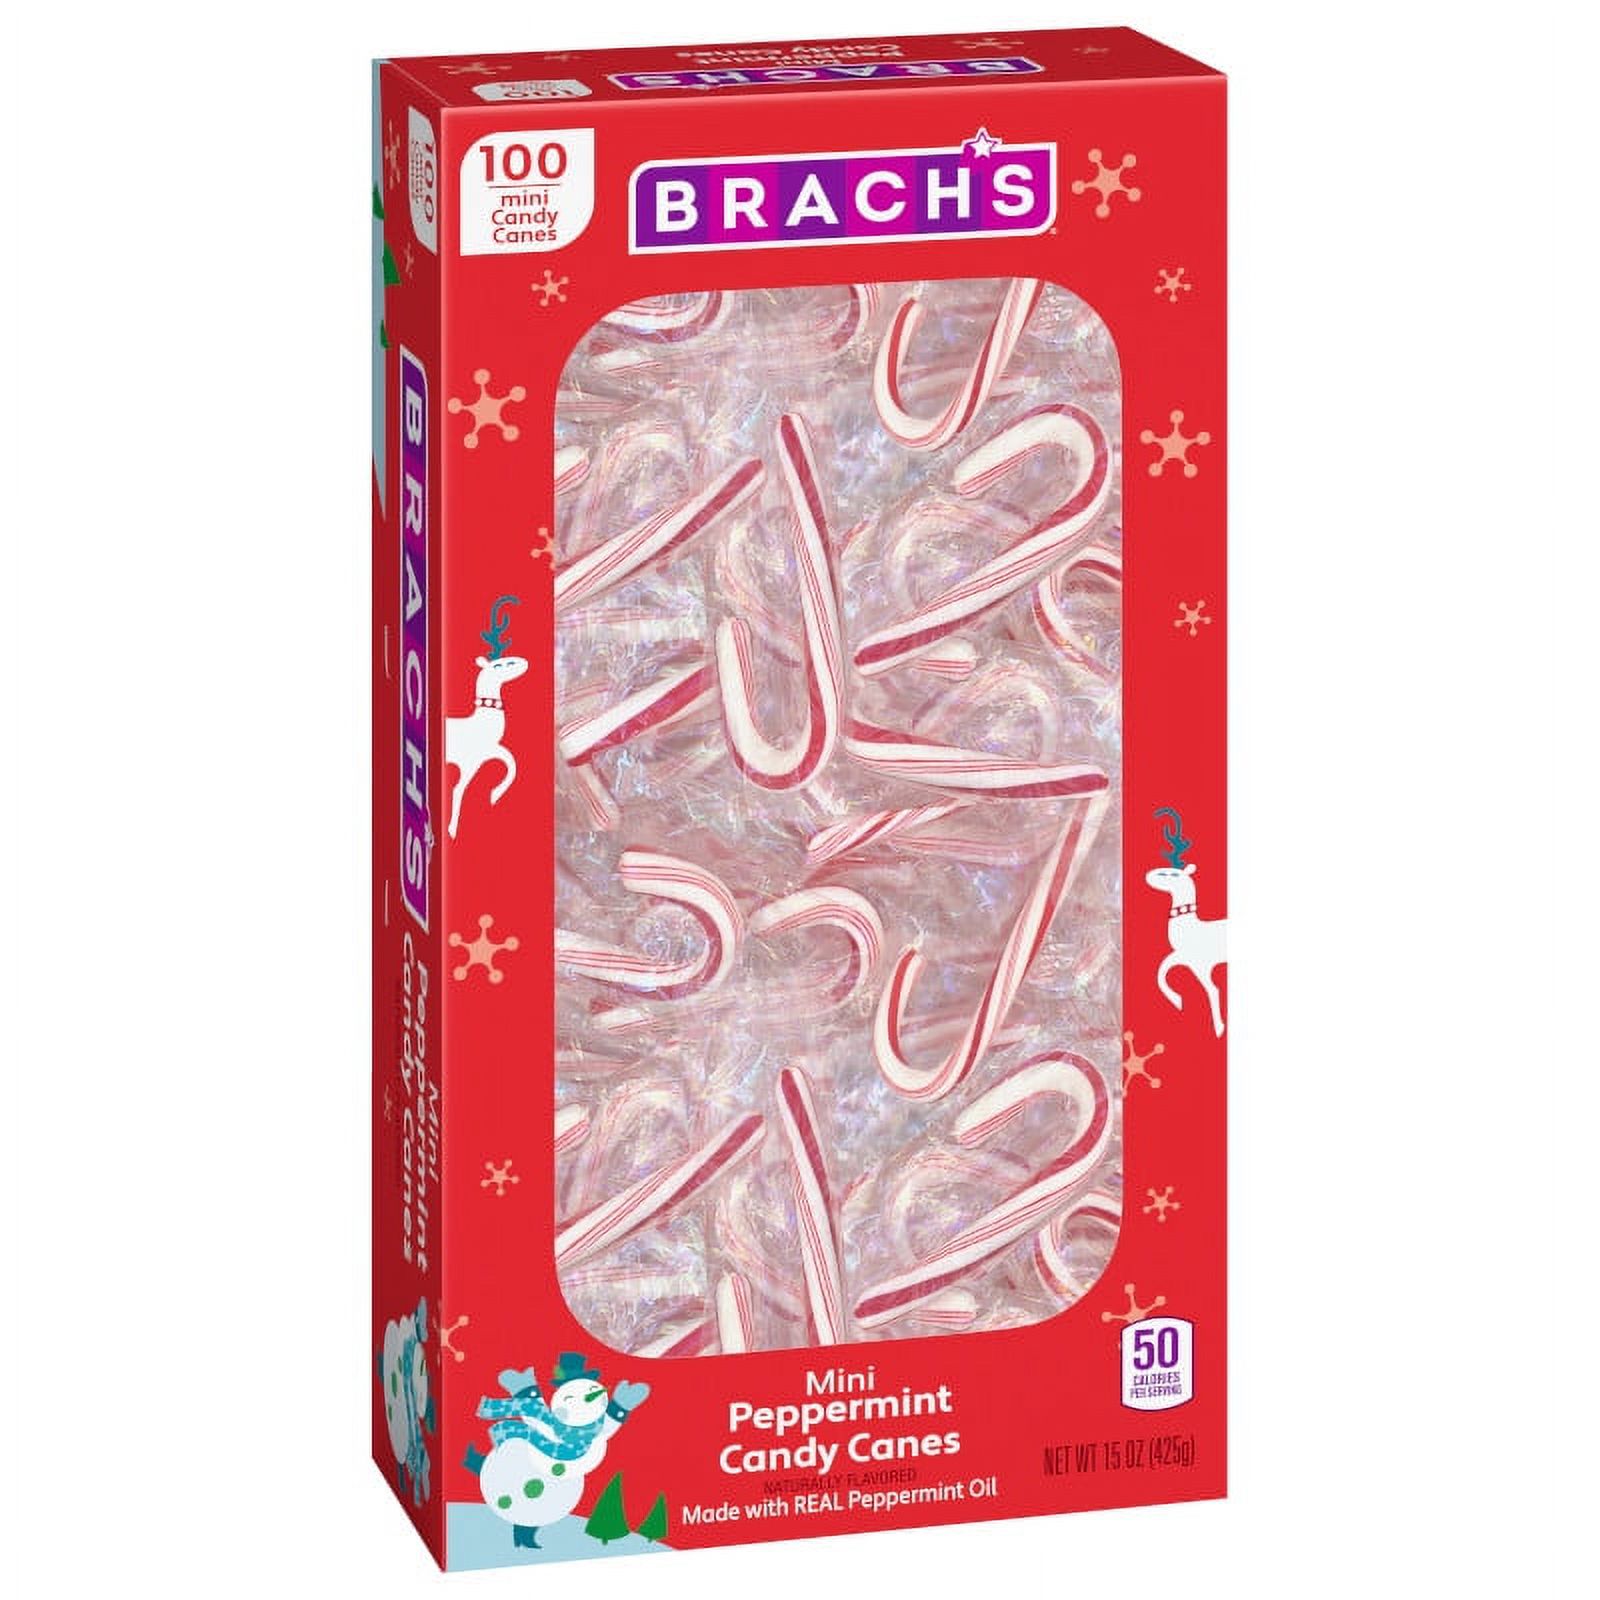 Brach's Mini Peppermint Holiday Candy Canes, Christmas Stocking Stuffer Candy, 100ct Box, 15oz - image 2 of 12